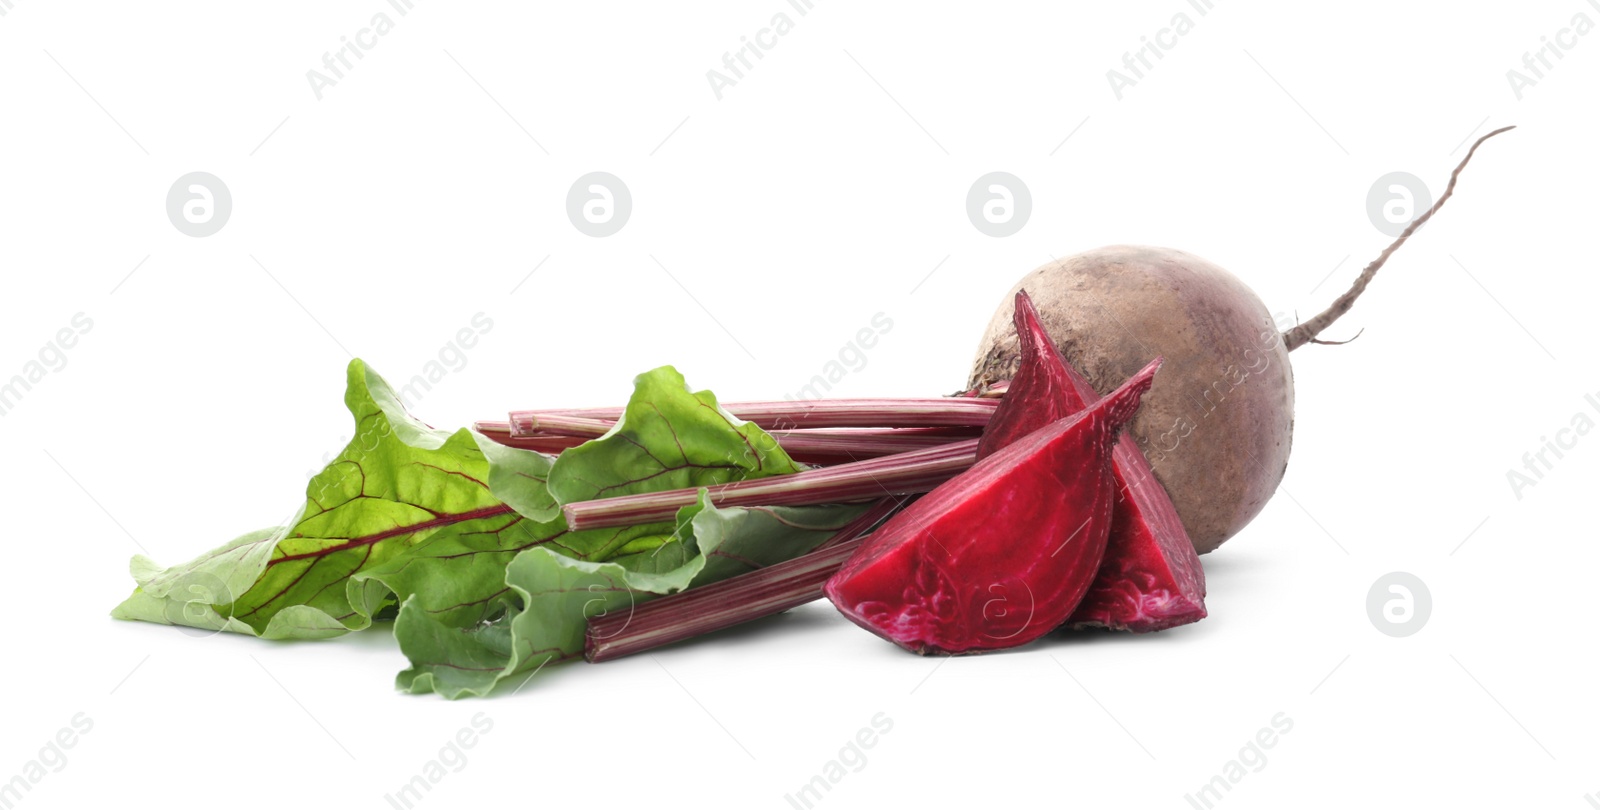 Photo of Whole and cut red beets on white background